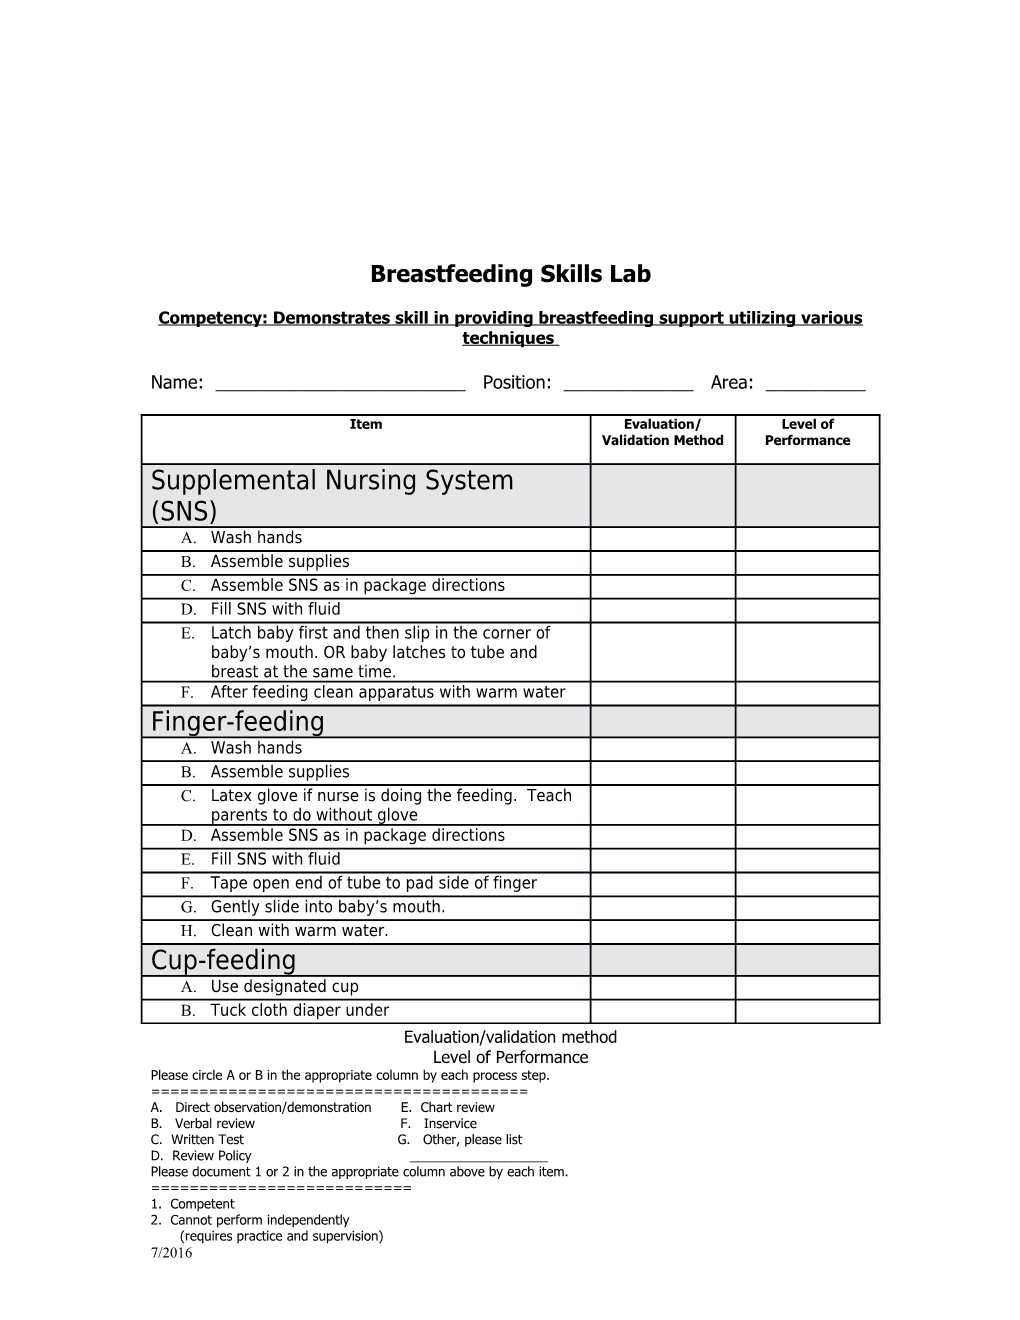 Competency: Demonstrates Skill in Providingbreastfeeding Support Utilizing Various Techniques